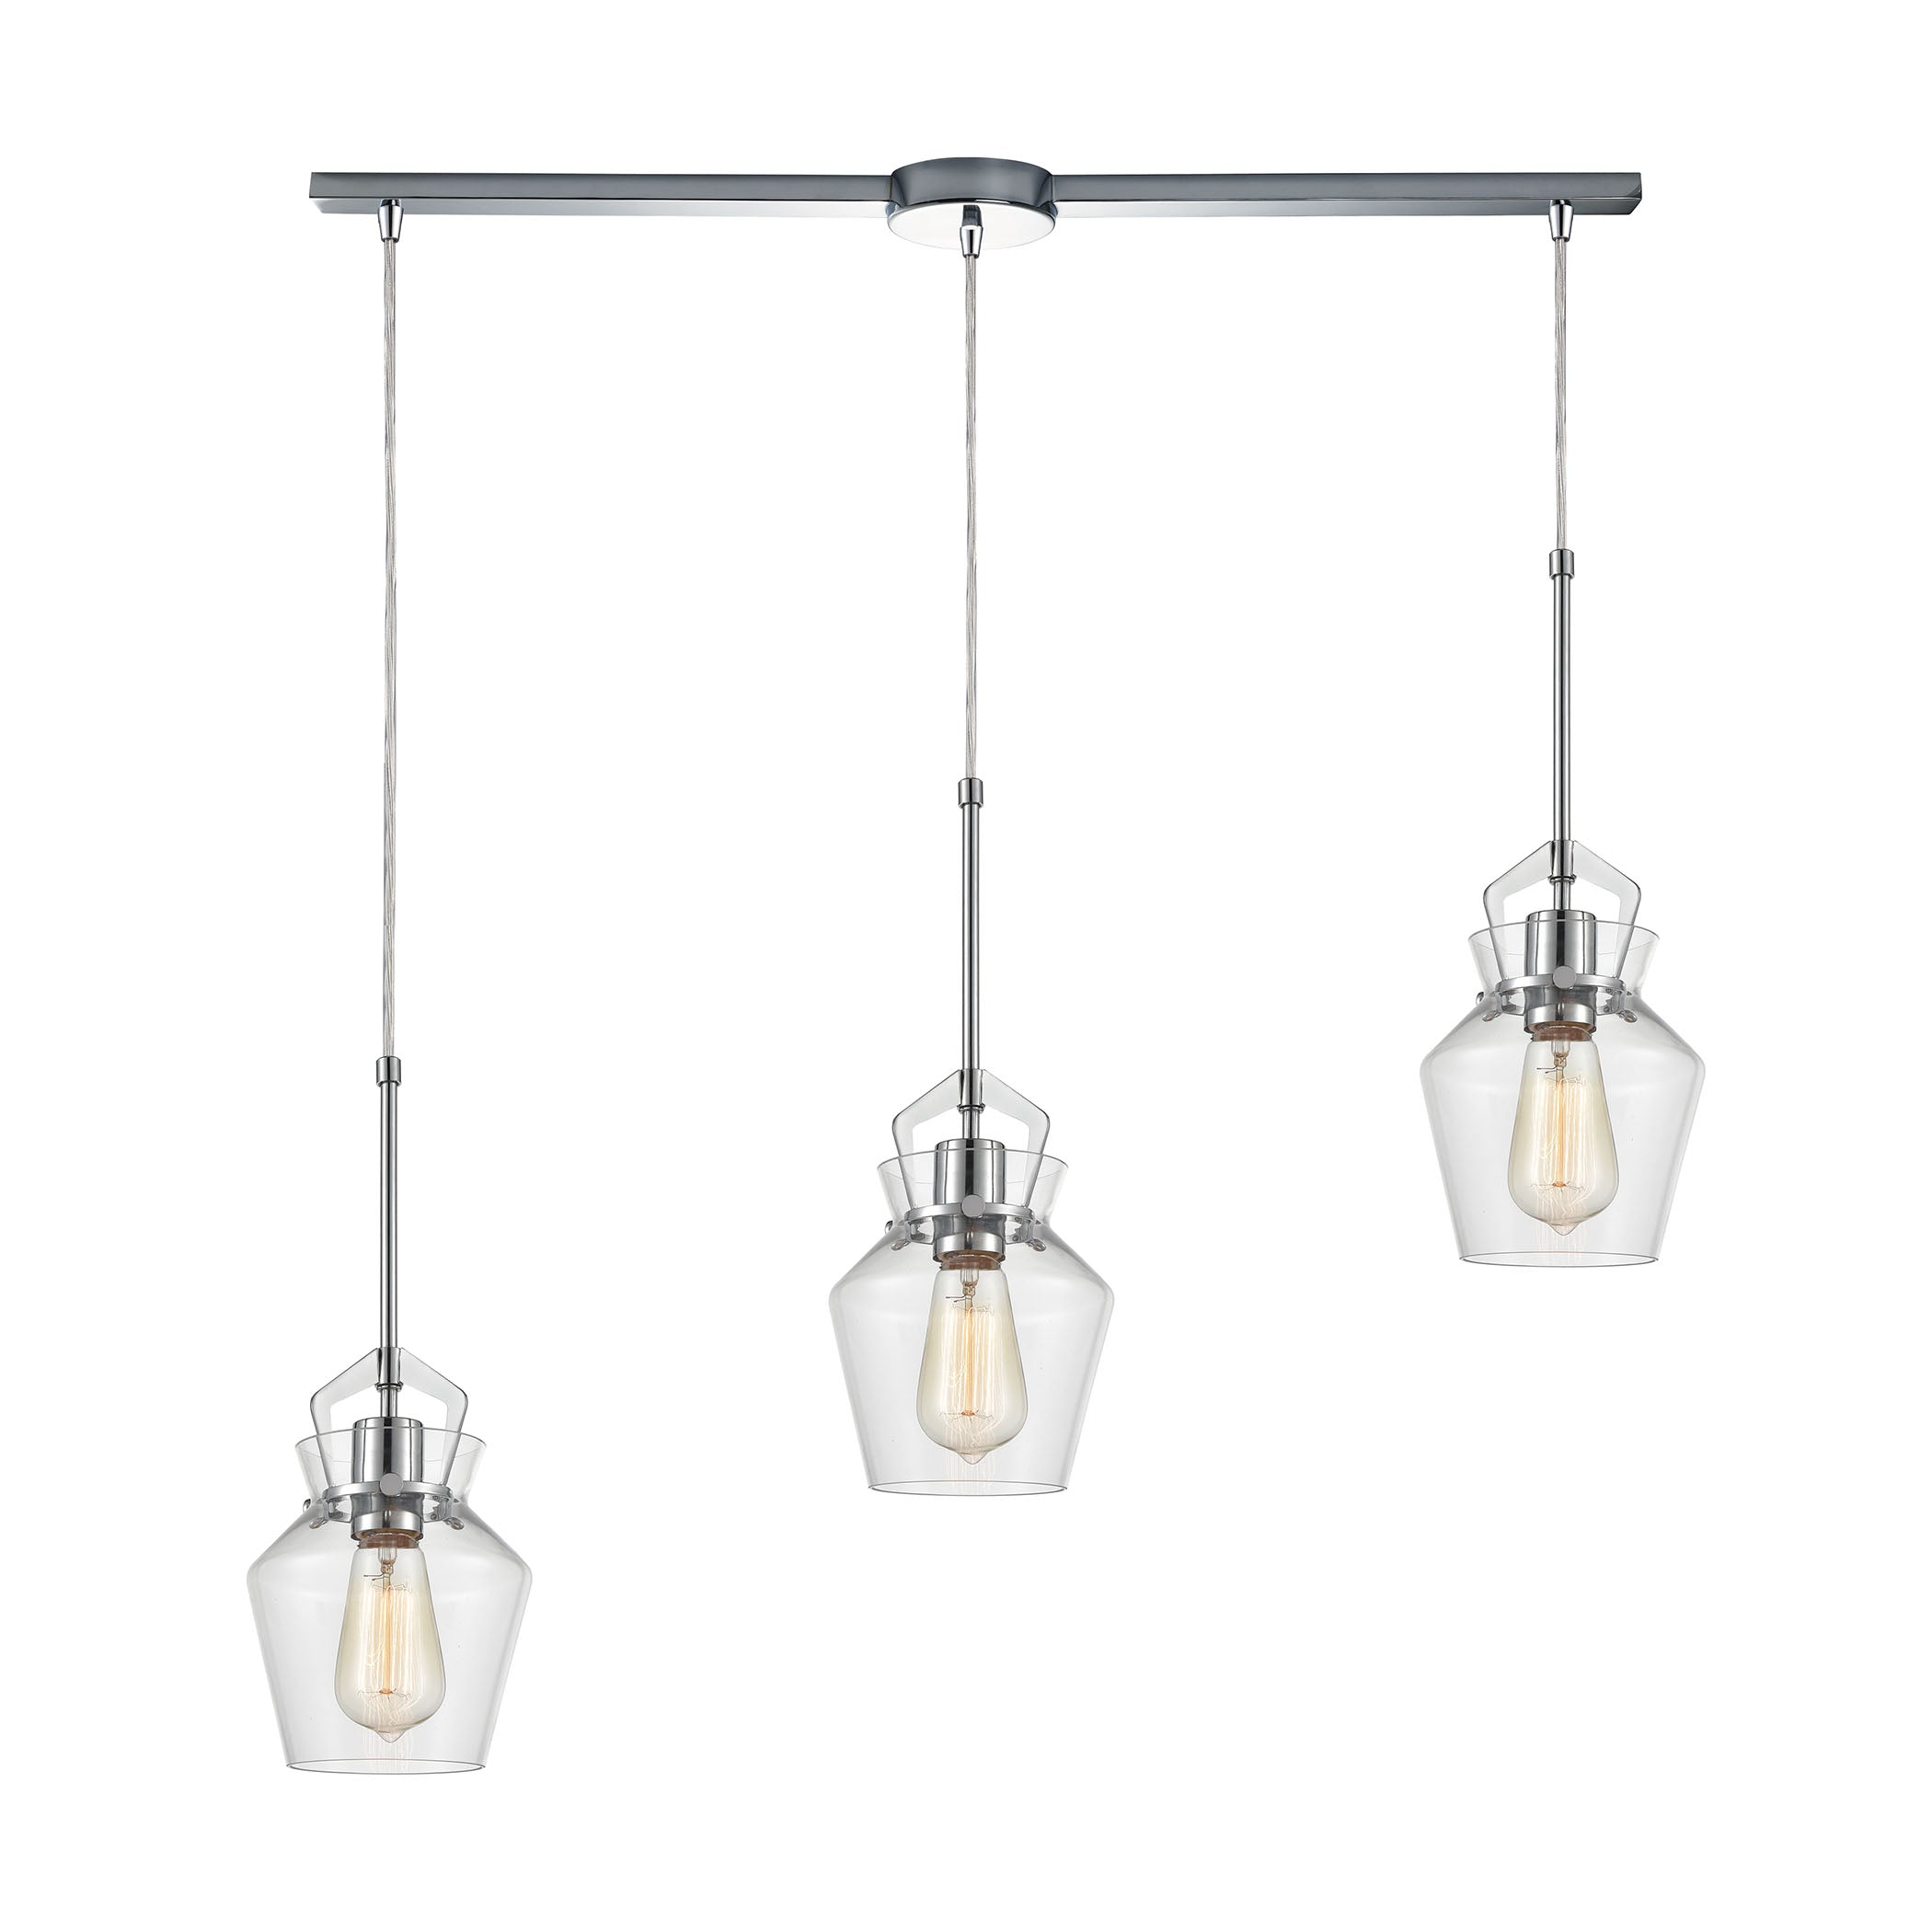 ELK Lighting 21161/3L Caliper 3-Light Linear Mini Pendant Fixture in Polished Chrome with Clear Glass